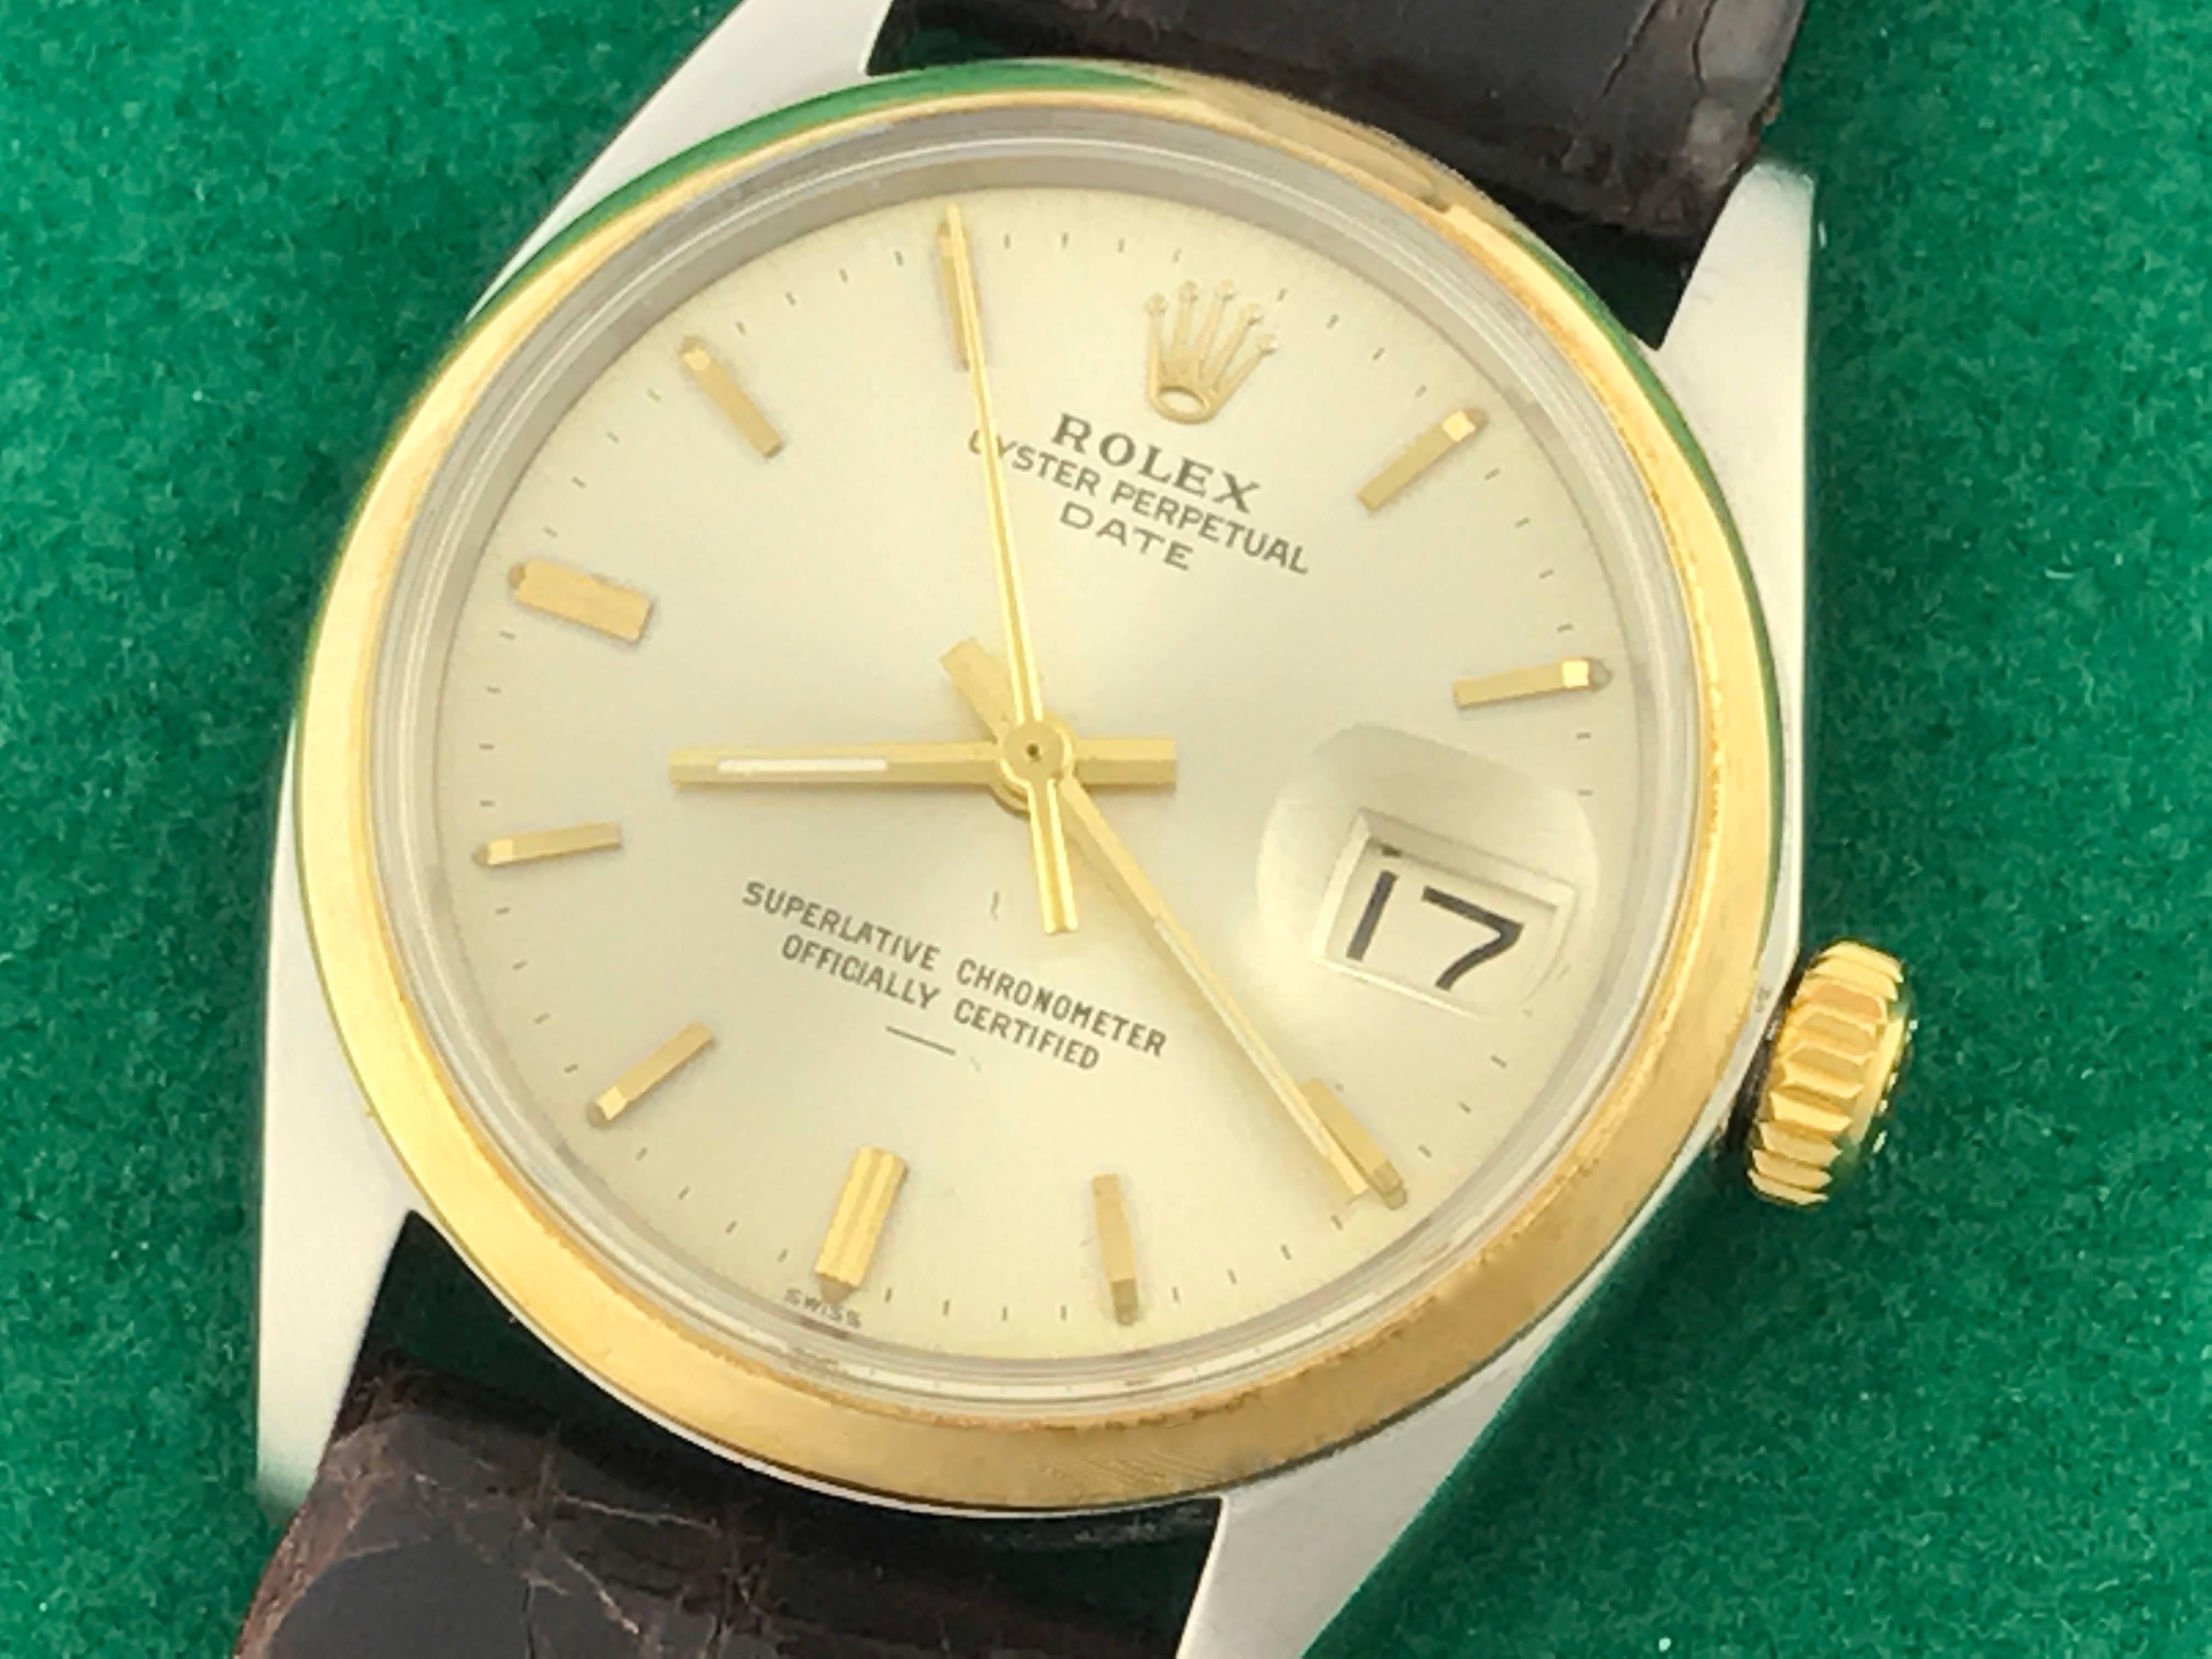 The Rolex Date Model 1500 pre-owned men's automatic wrist watch. Featuring an oyster silvered dial with yellow gold hour markers and stainless steel case with 14K yellow gold smooth bezel. Measures 34mm. Comes with a dark brown alligator strap, box,